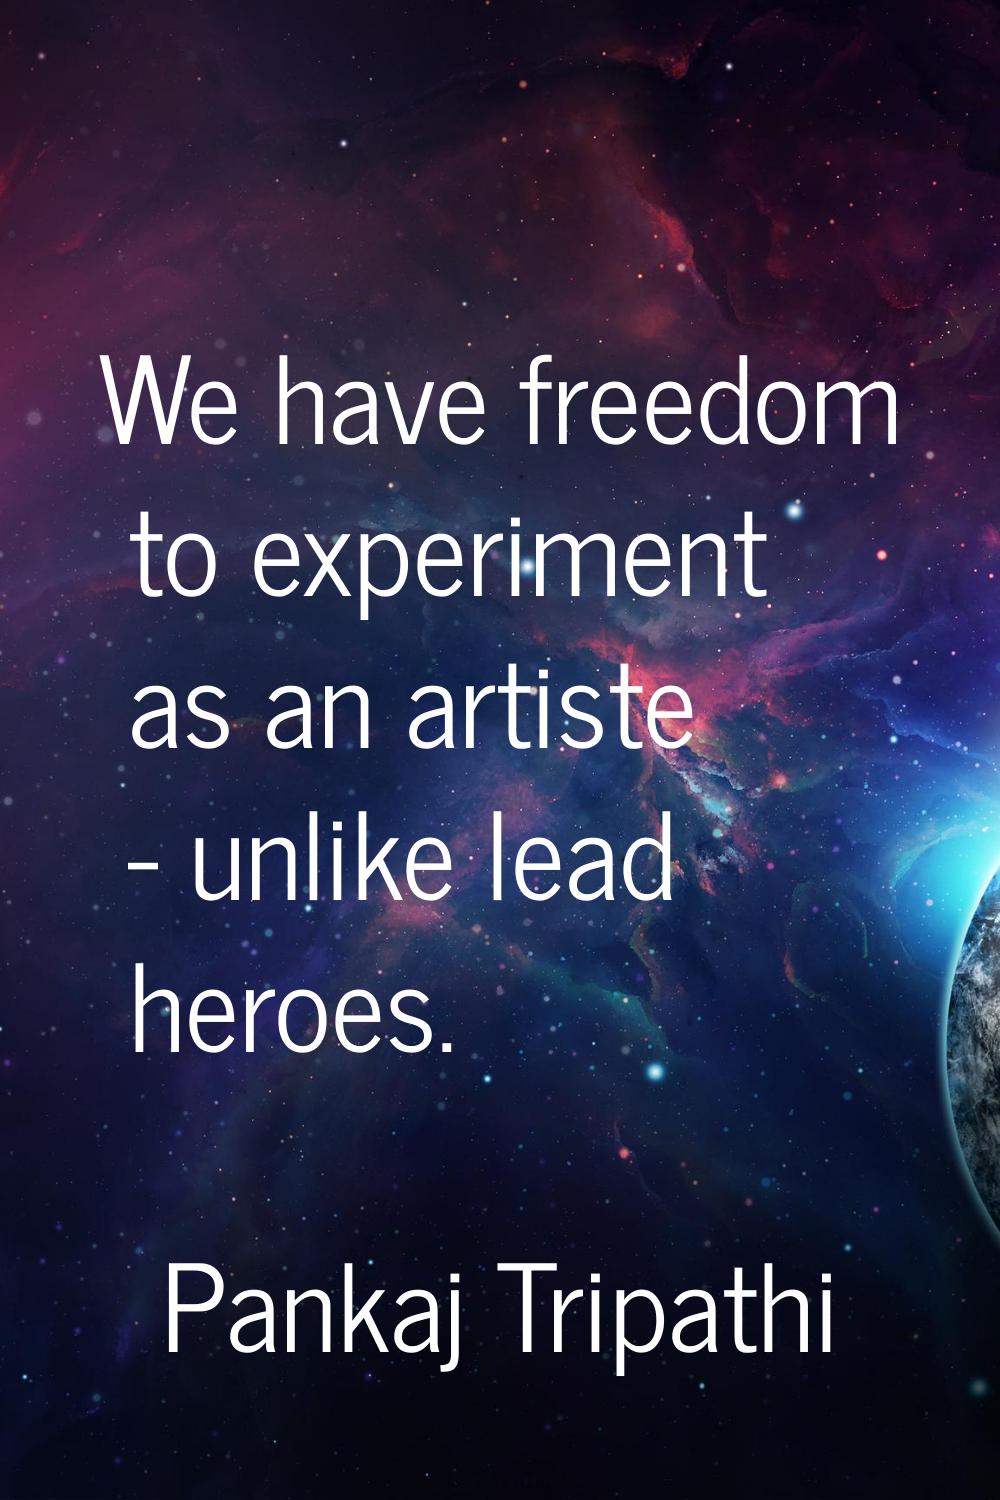 We have freedom to experiment as an artiste - unlike lead heroes.